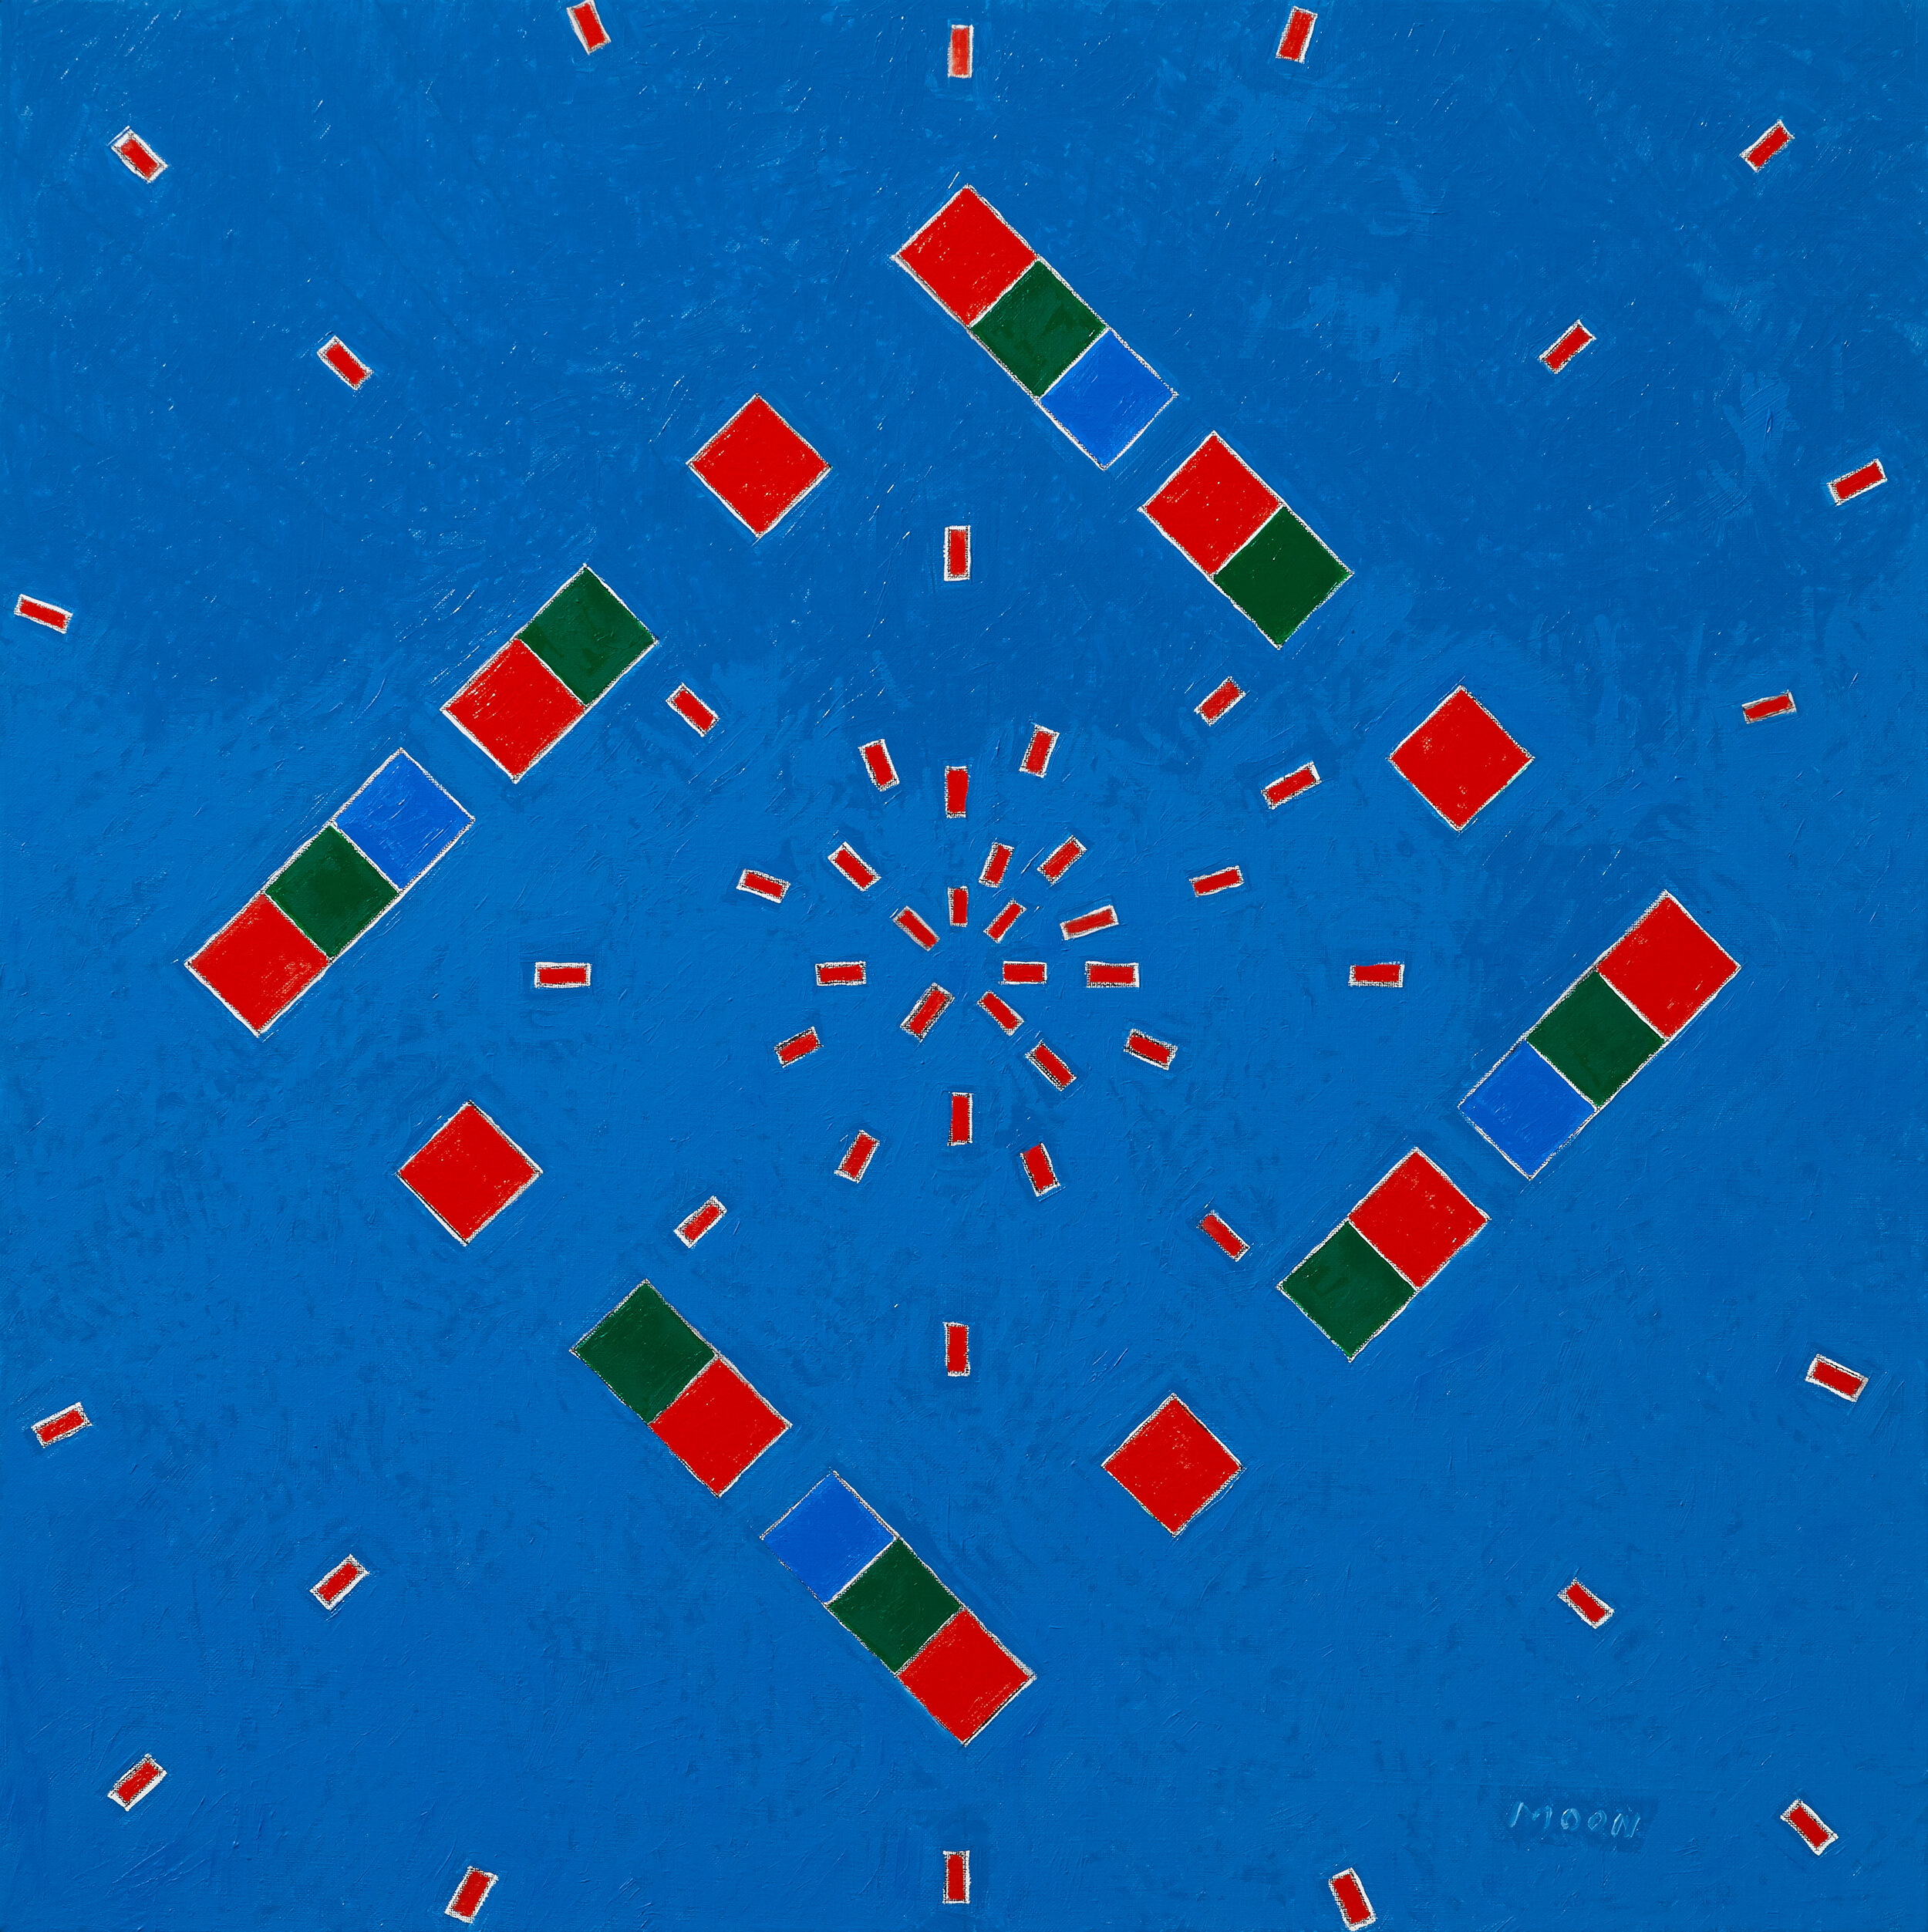 Composition of red green blue 003 Oil on canvas 80x80(cm) 2019.jpg